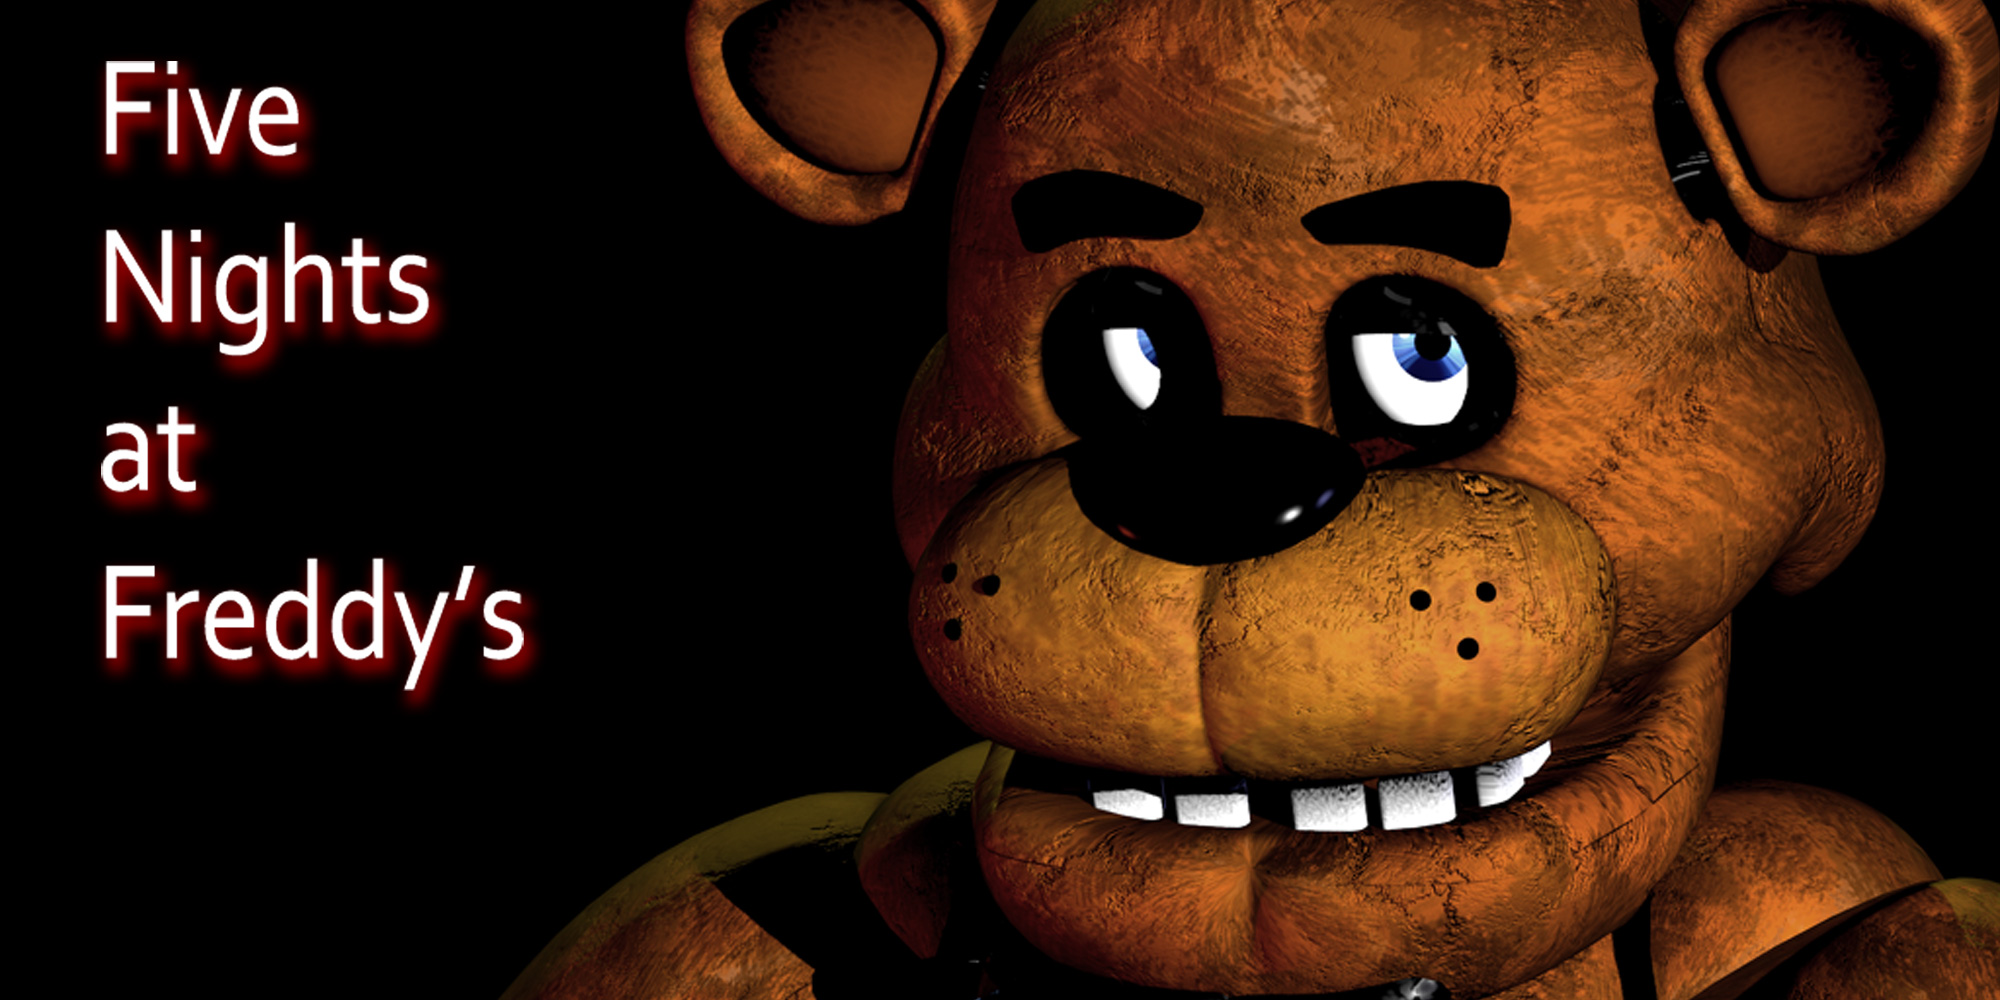 Five nights at freddys 1 online